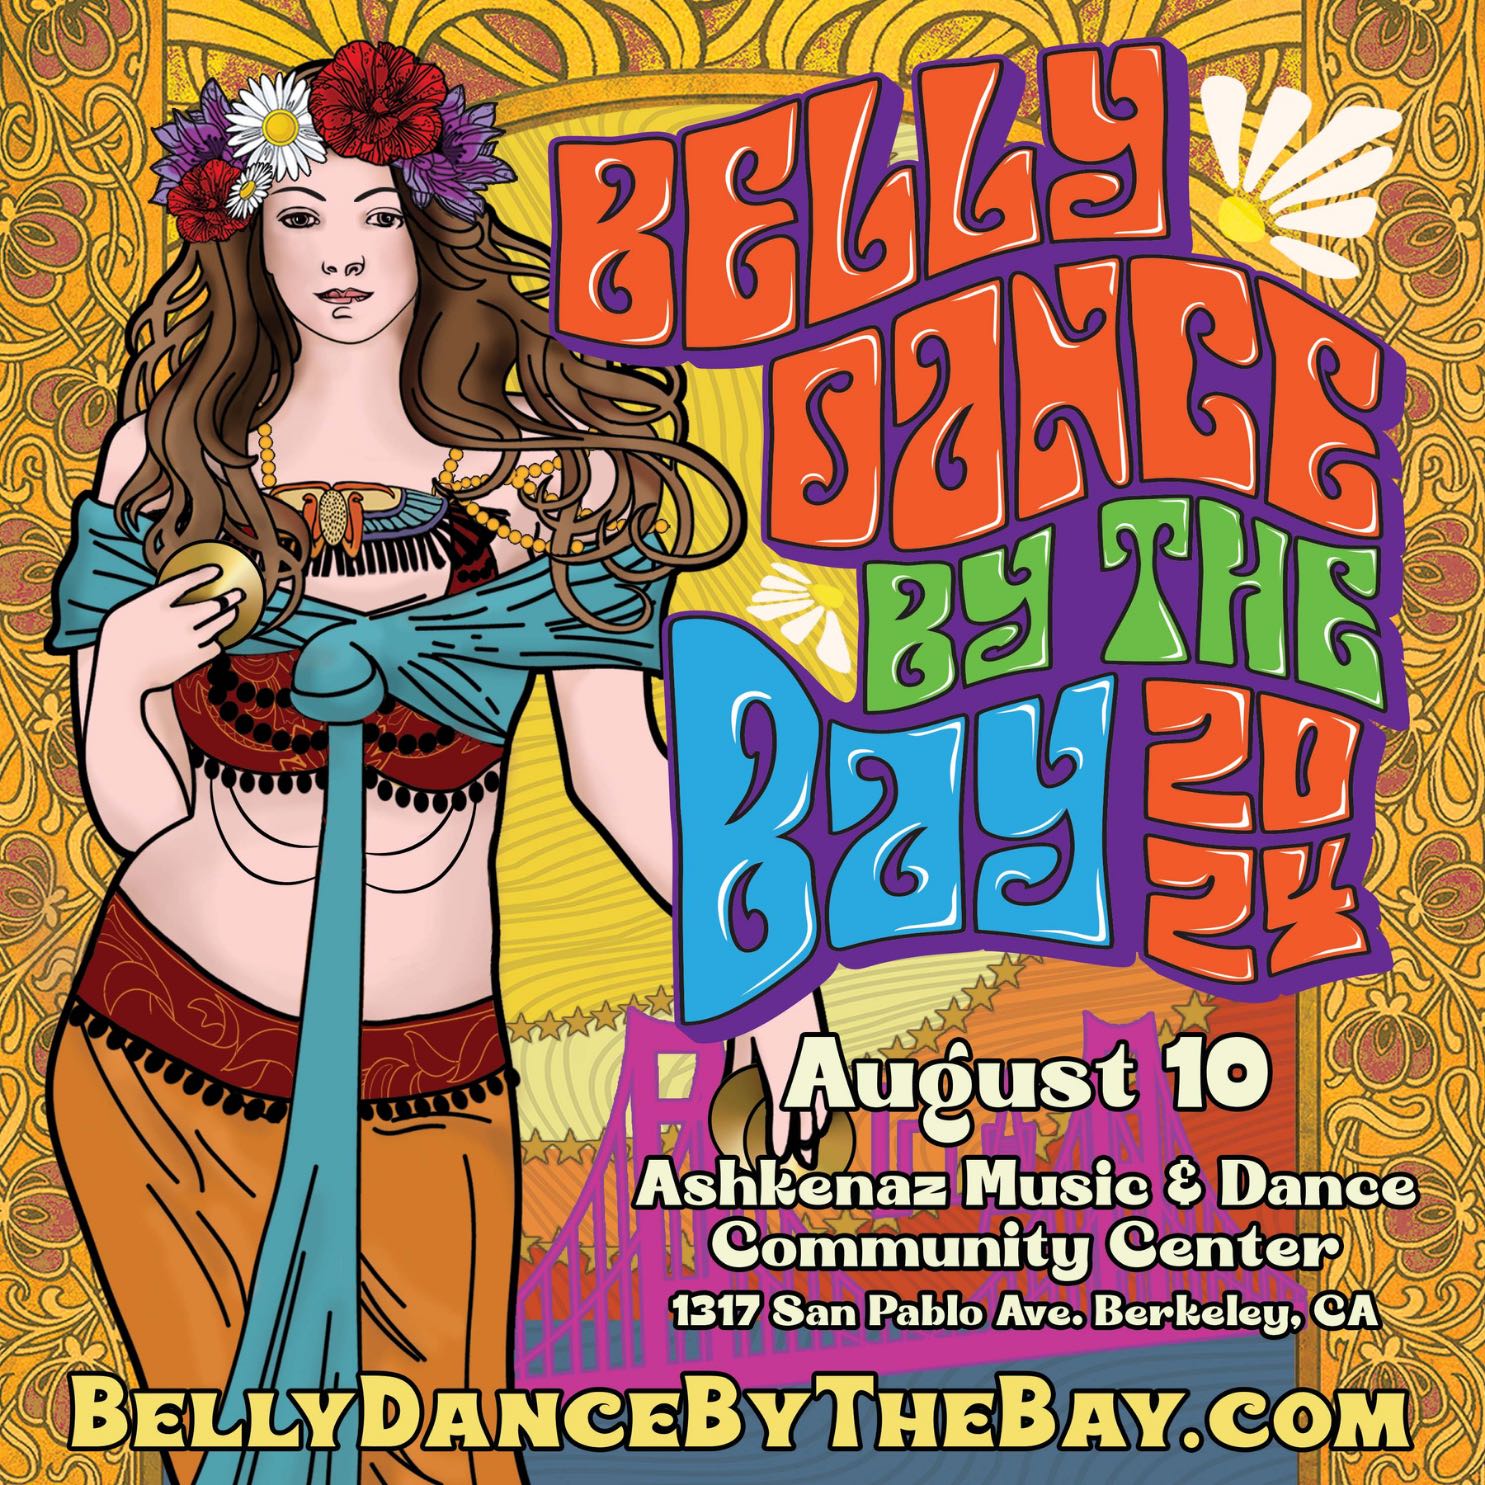 Graphic design with bright colors for Belly Dance by the Bay, including a belly dancer with finger cymbals.